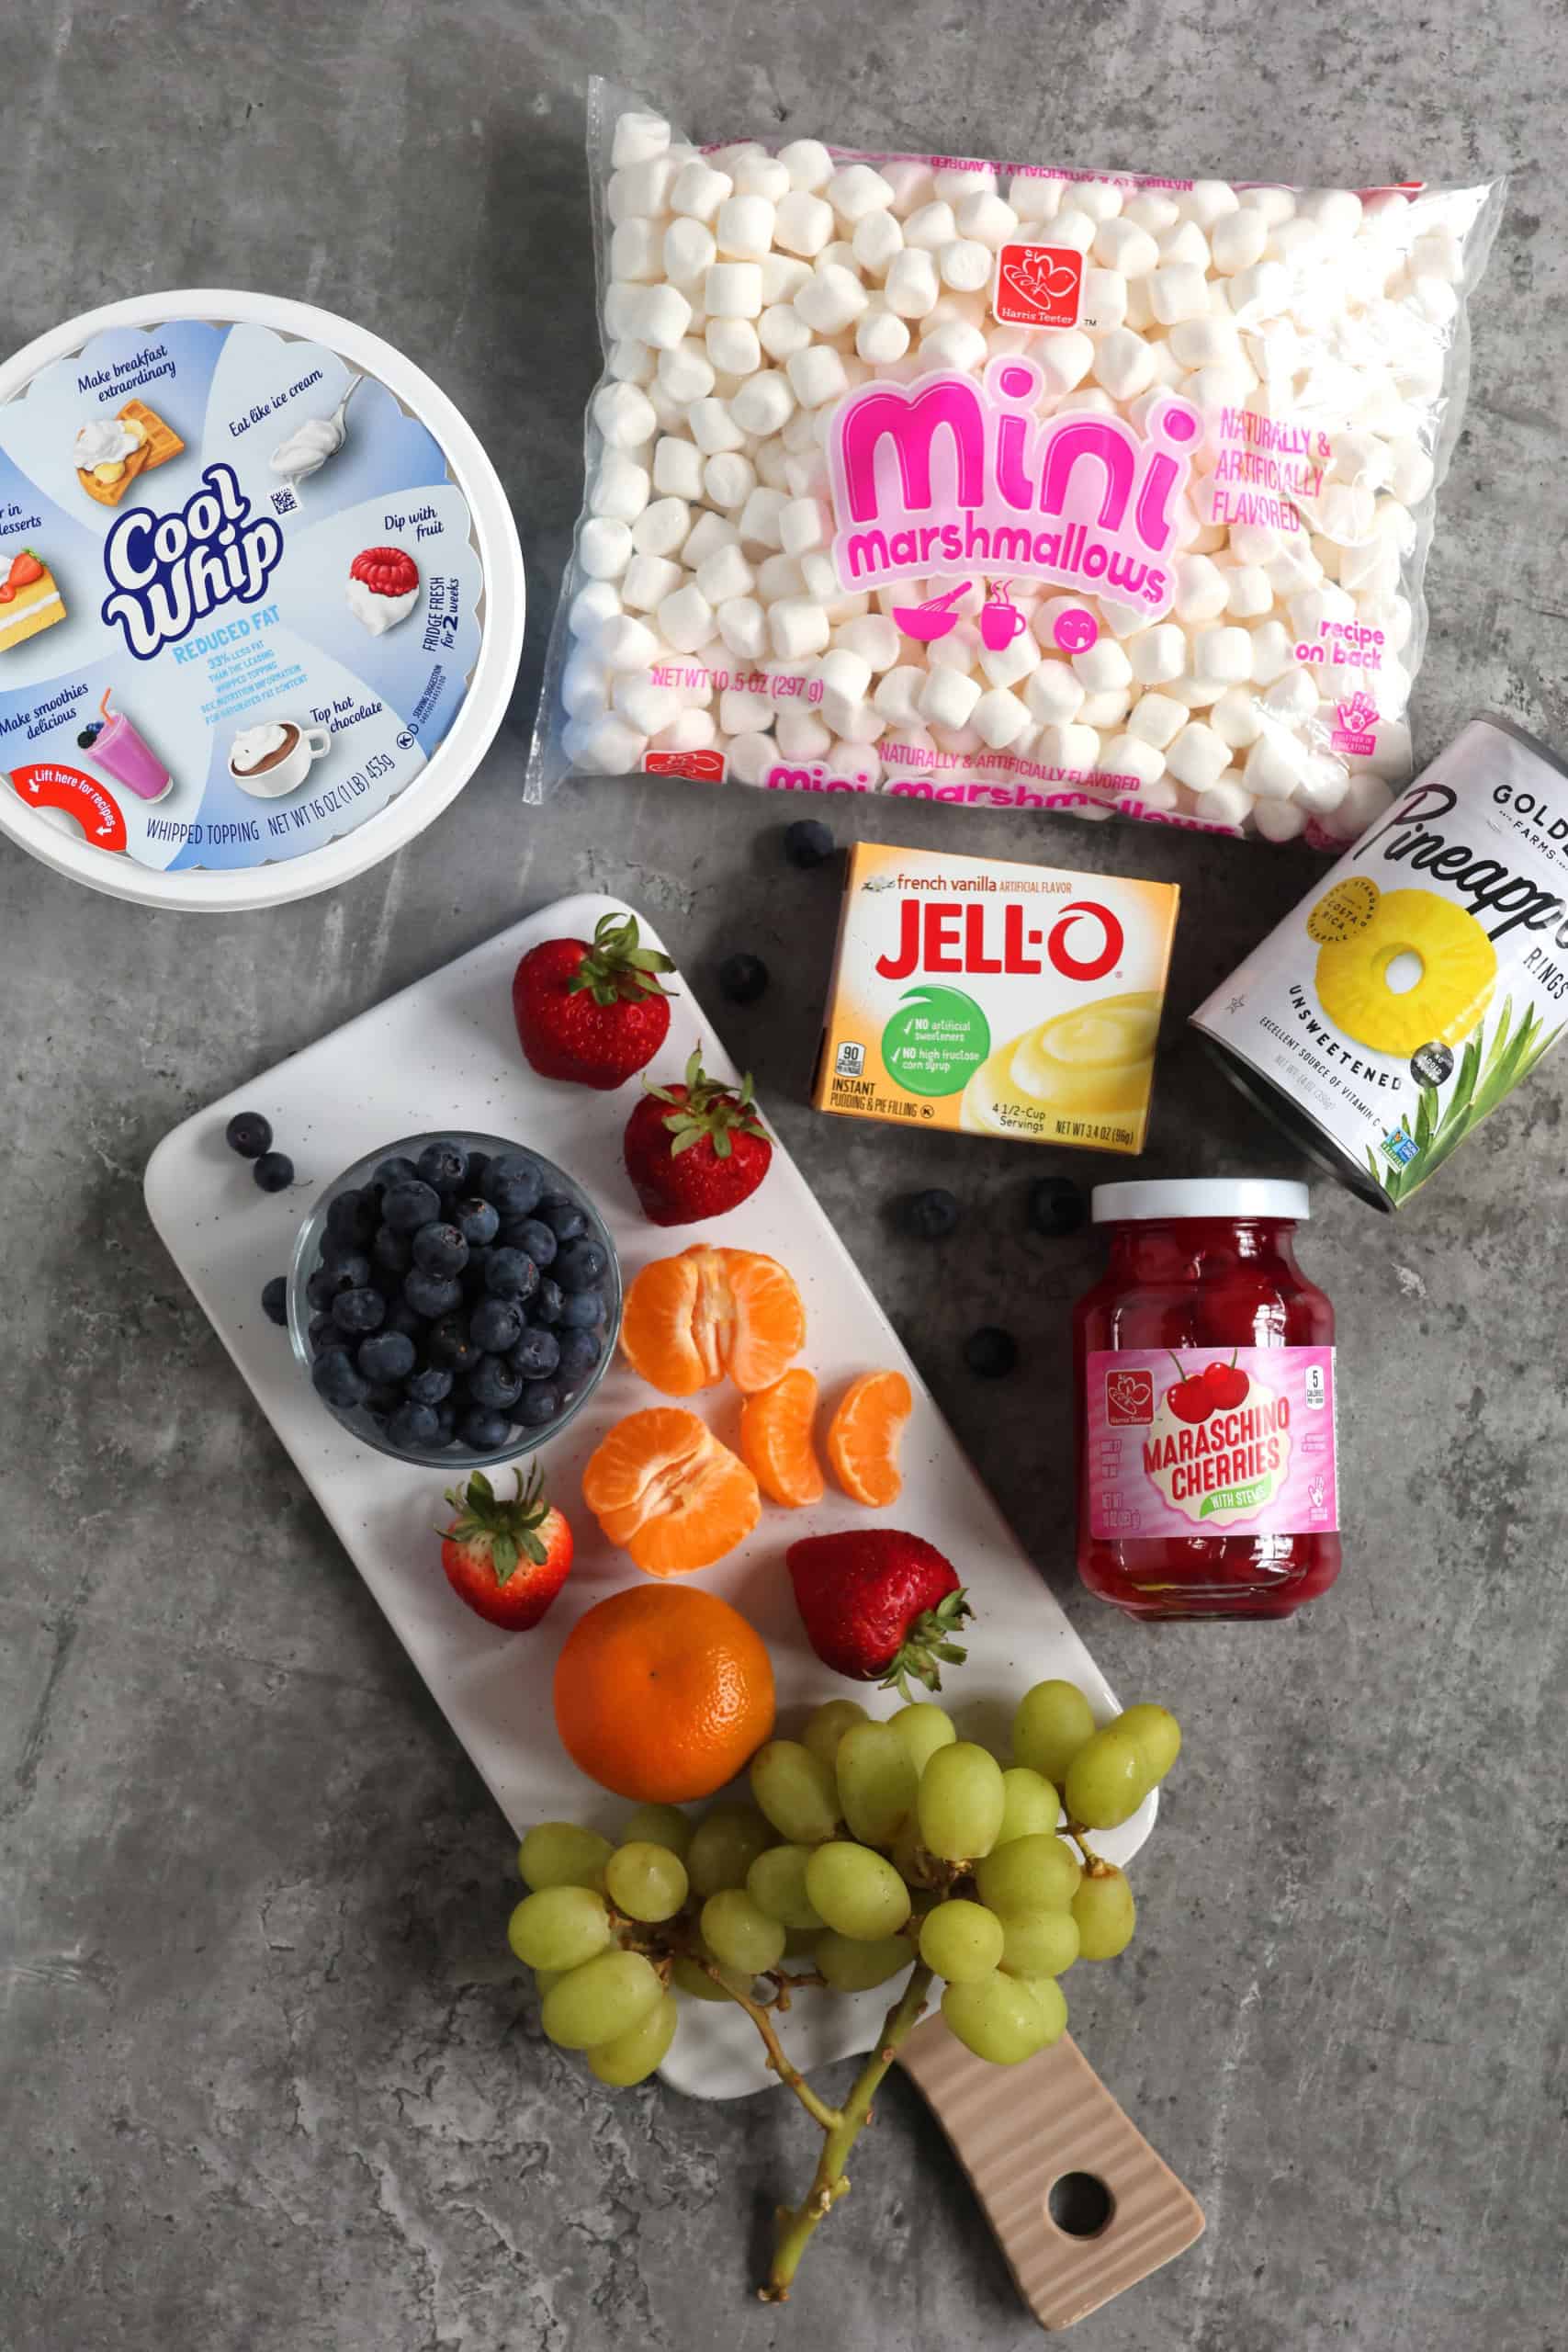 Ingredients to make an Ambrosia Fruit Salad with Cool Whip, Pudding and Mashmallows